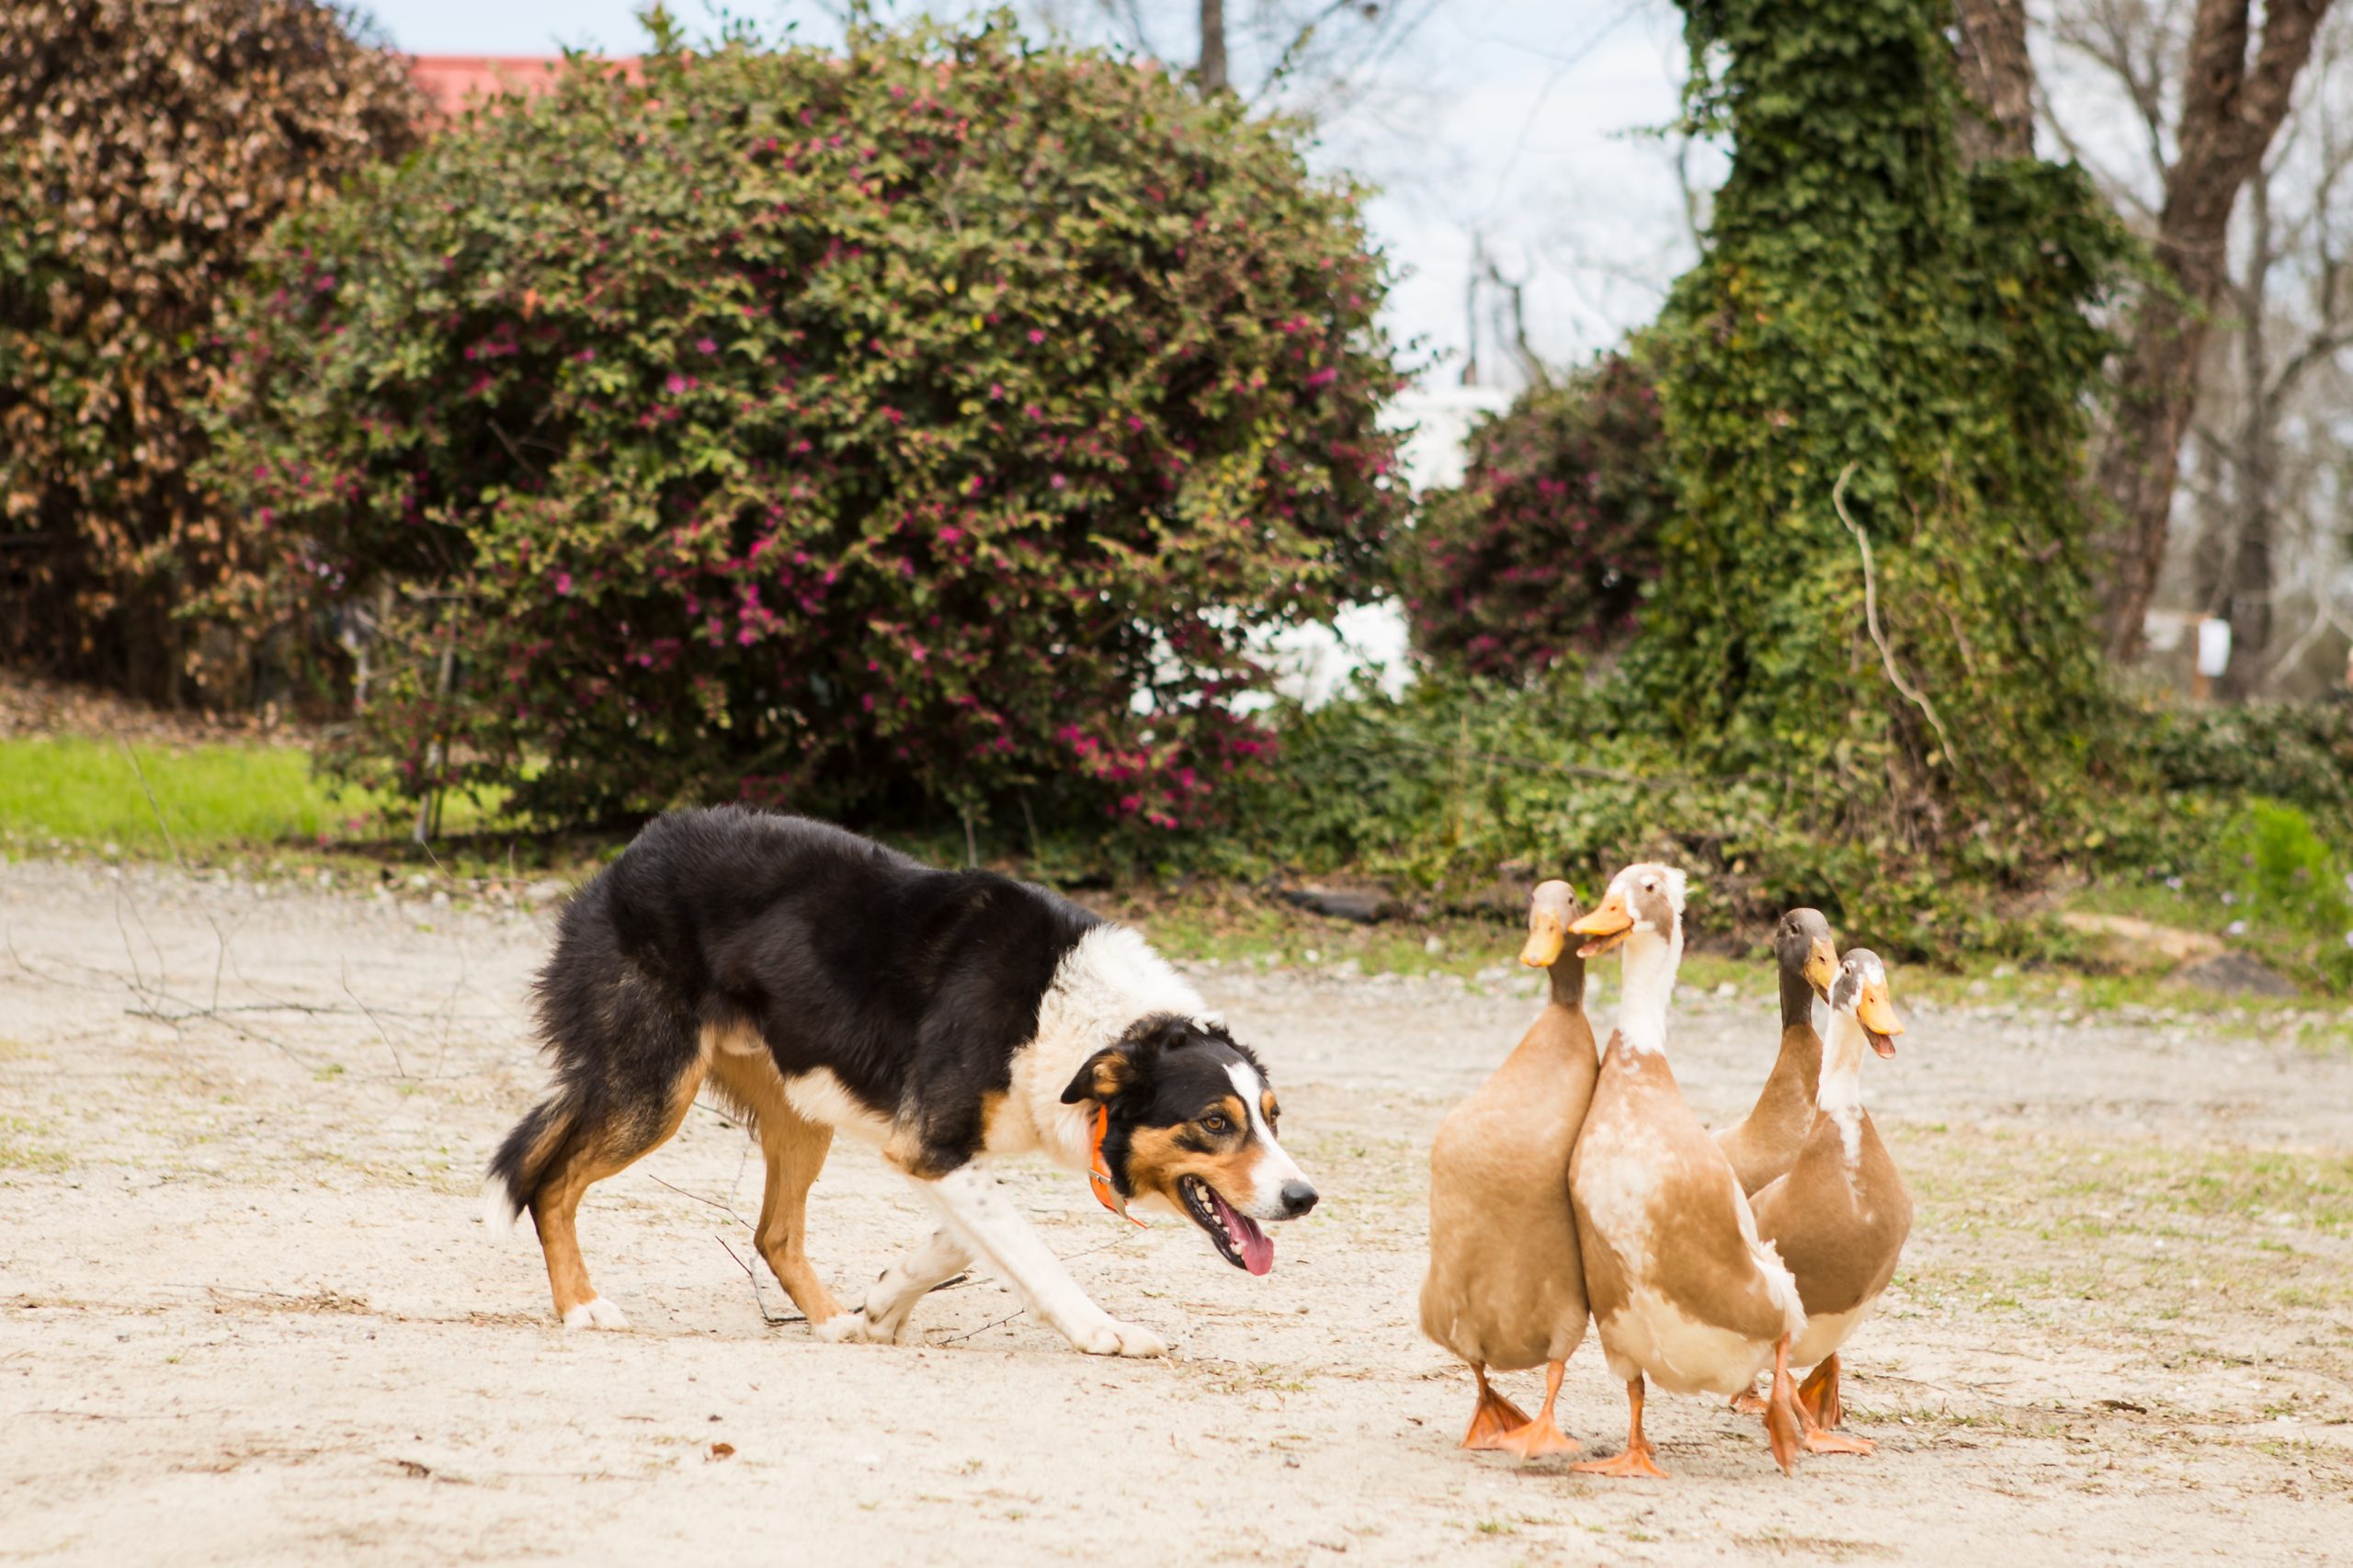 Red Creek Farm comes with dogs and ducks for the border collie demonstration on sheep shearing day every year in the spring. Photography courtesy of Julie Jackson Prickett